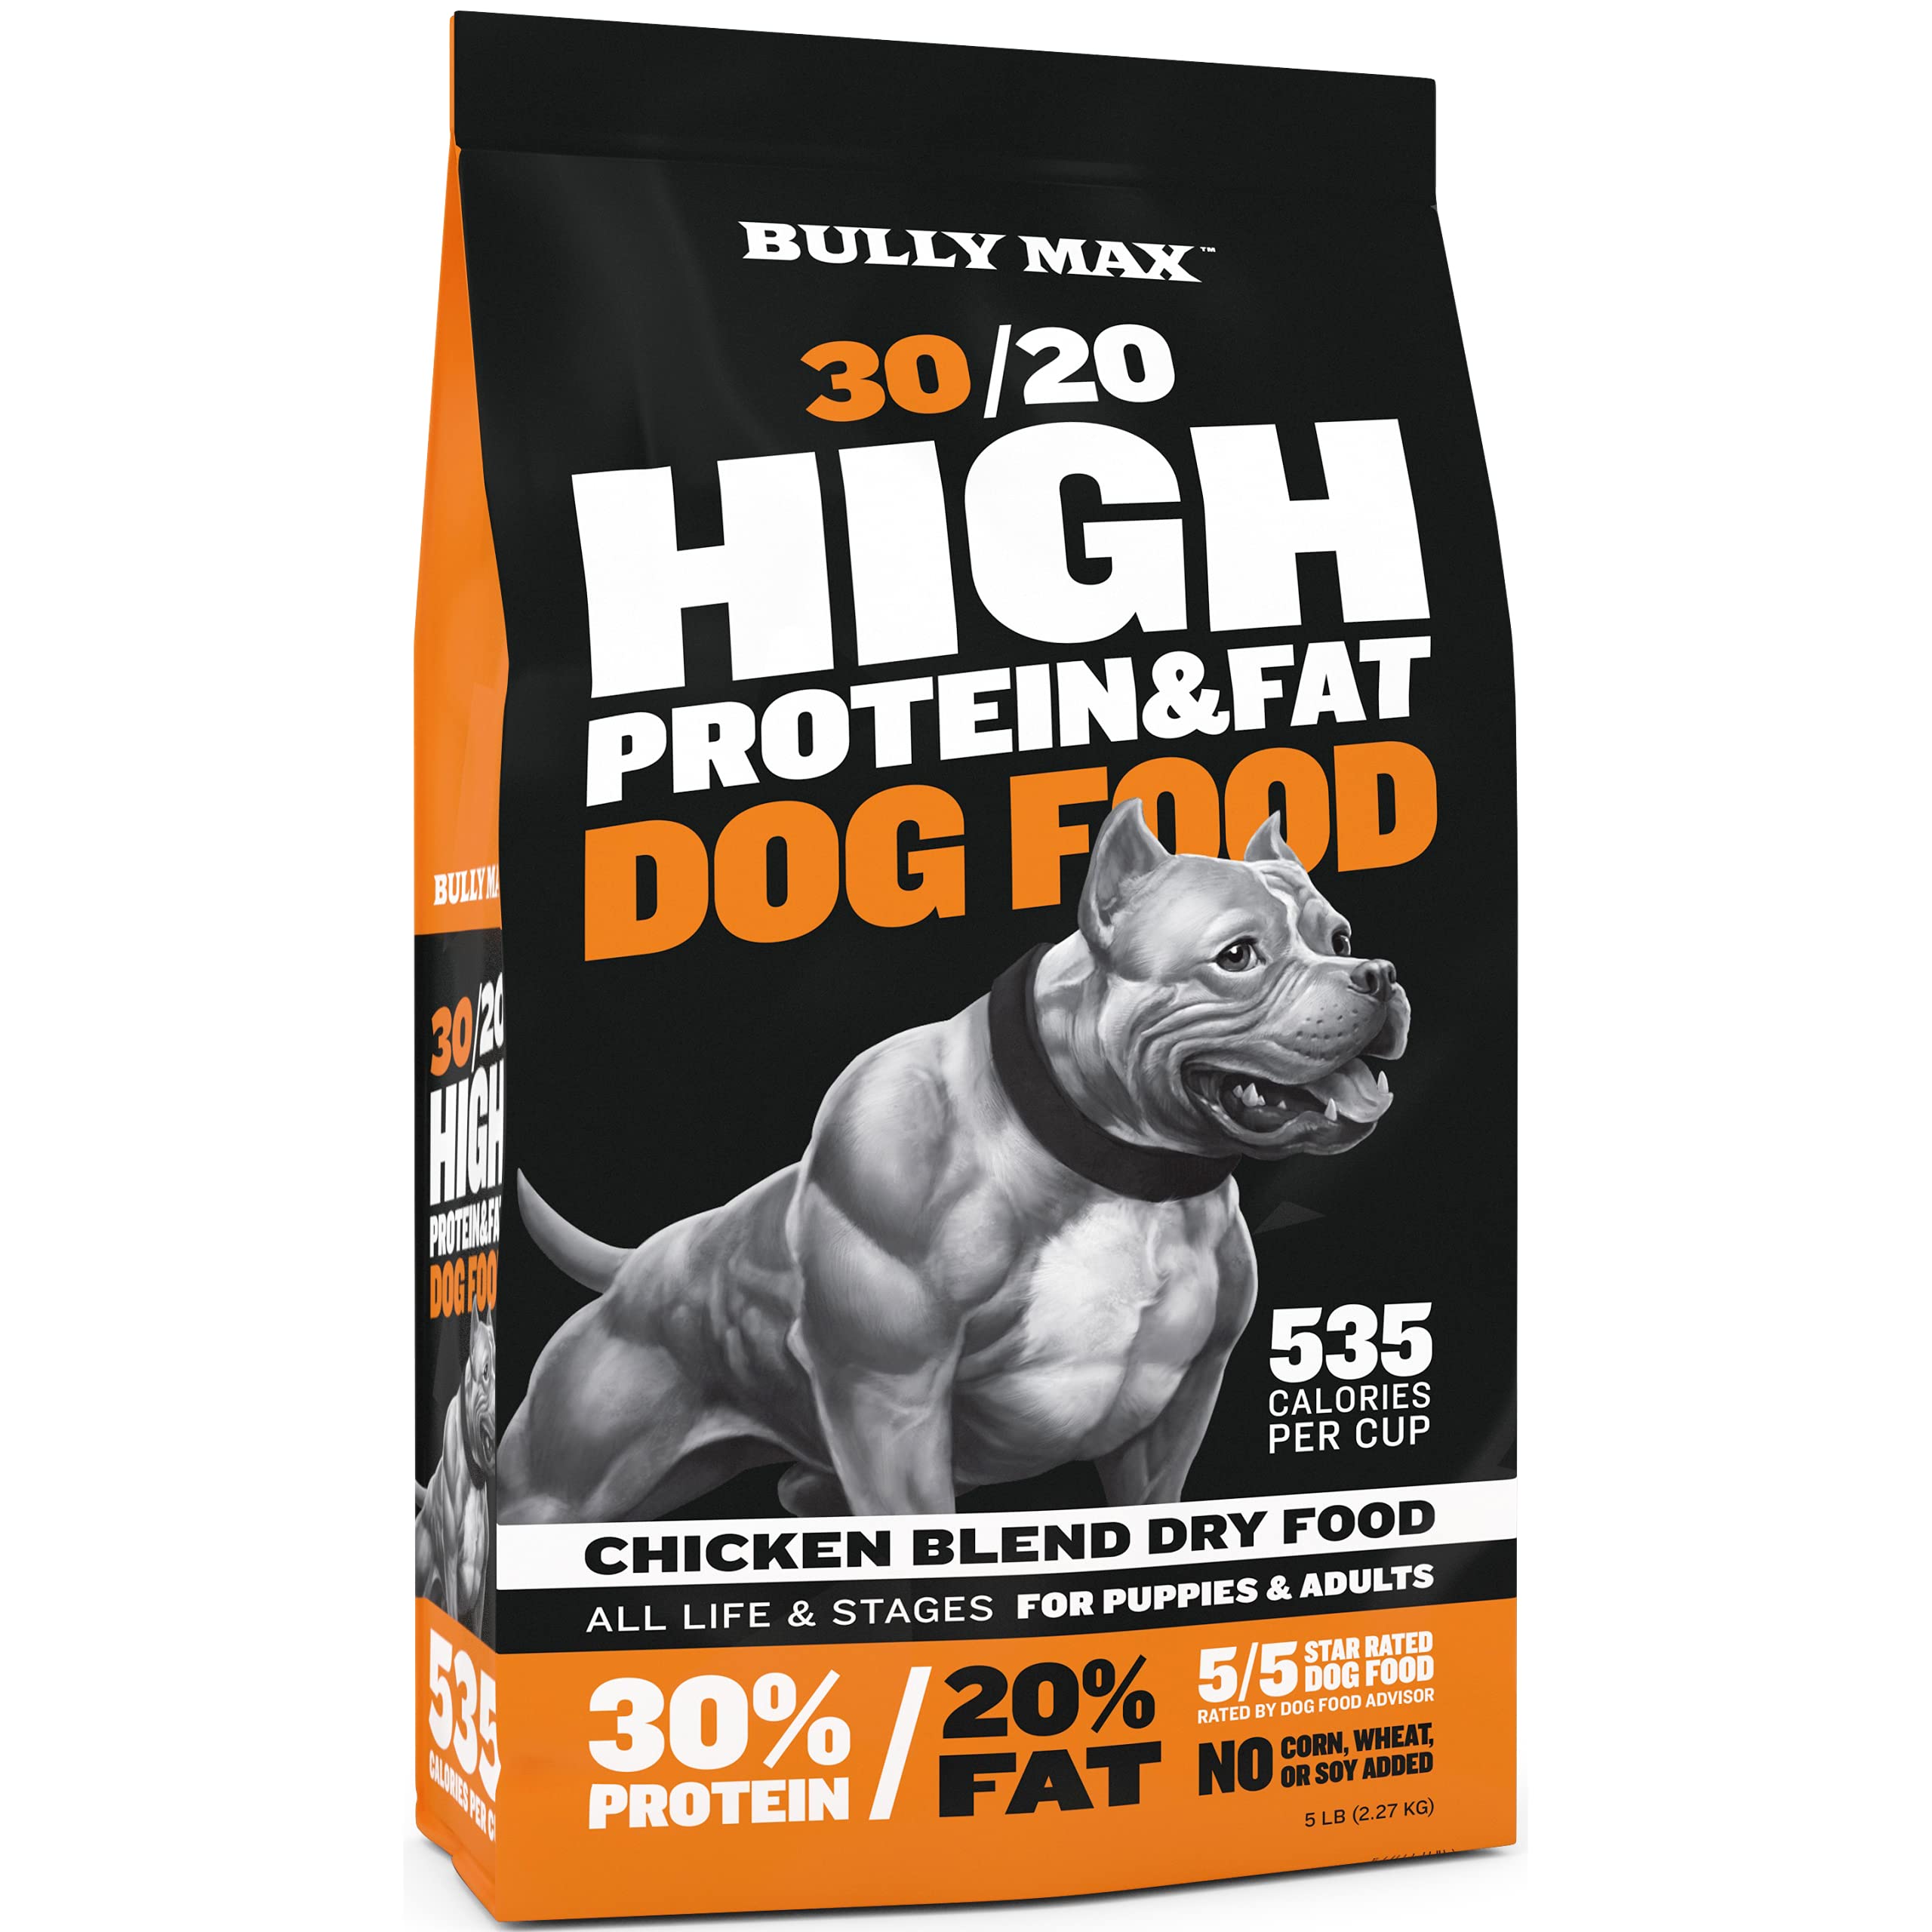 Bully Max High Performance Super Premium Dog Food. for All Ages (for Puppies & Adult Dogs). 535 Calories Per Cup. for Muscle, Size, Growth, and Wei...